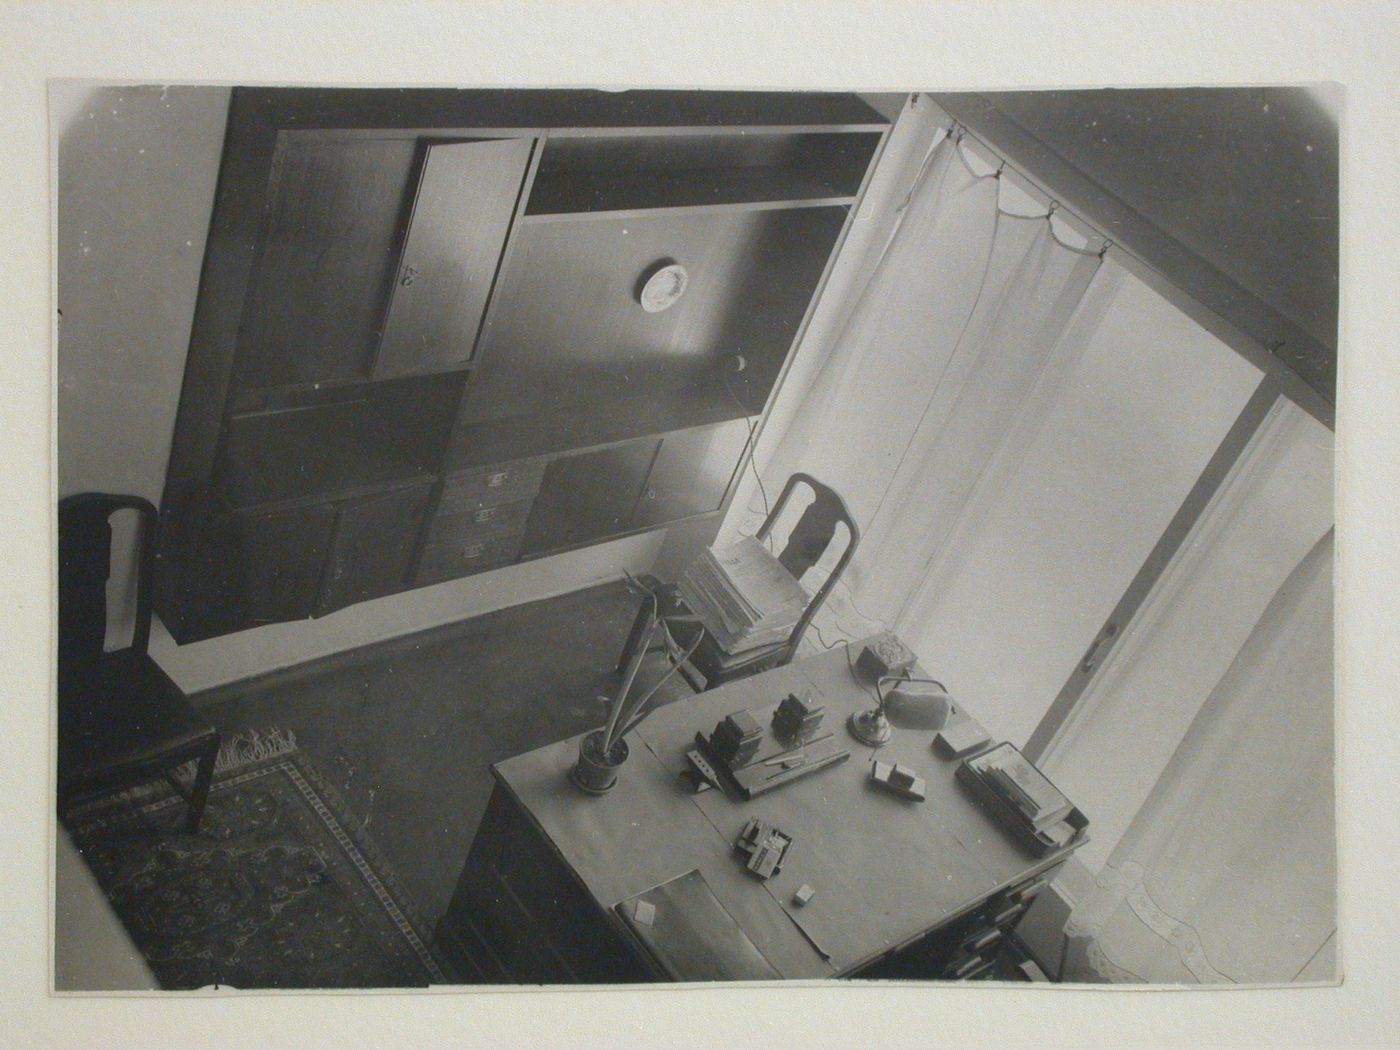 Interior view of Nikolai Milutin's apartment in the People's Commissariat for Finance (Narkomfin) Apartment Building from the upper level showing a built-in cupboard and a desk, 25 Novinskii Boulevard, Moscow